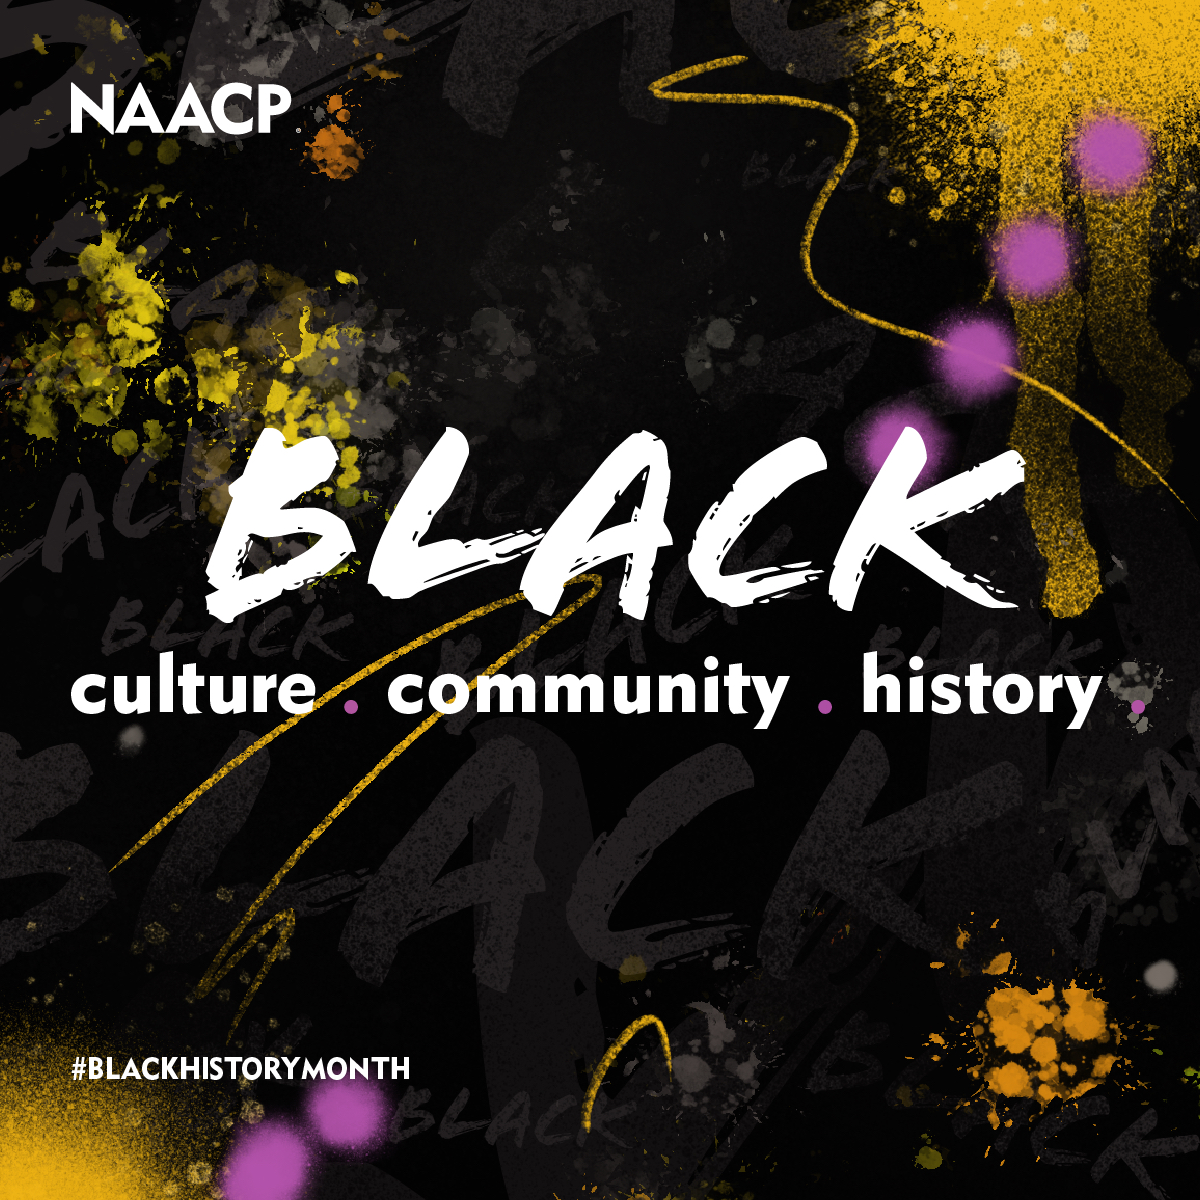 We are Black history. ✊🏾 From the trailblazers in our community to our advocacy and service, all year round we celebrate the achievements of our past, present, and future. Happy #BlackHistoryMonth y'all! 🖤